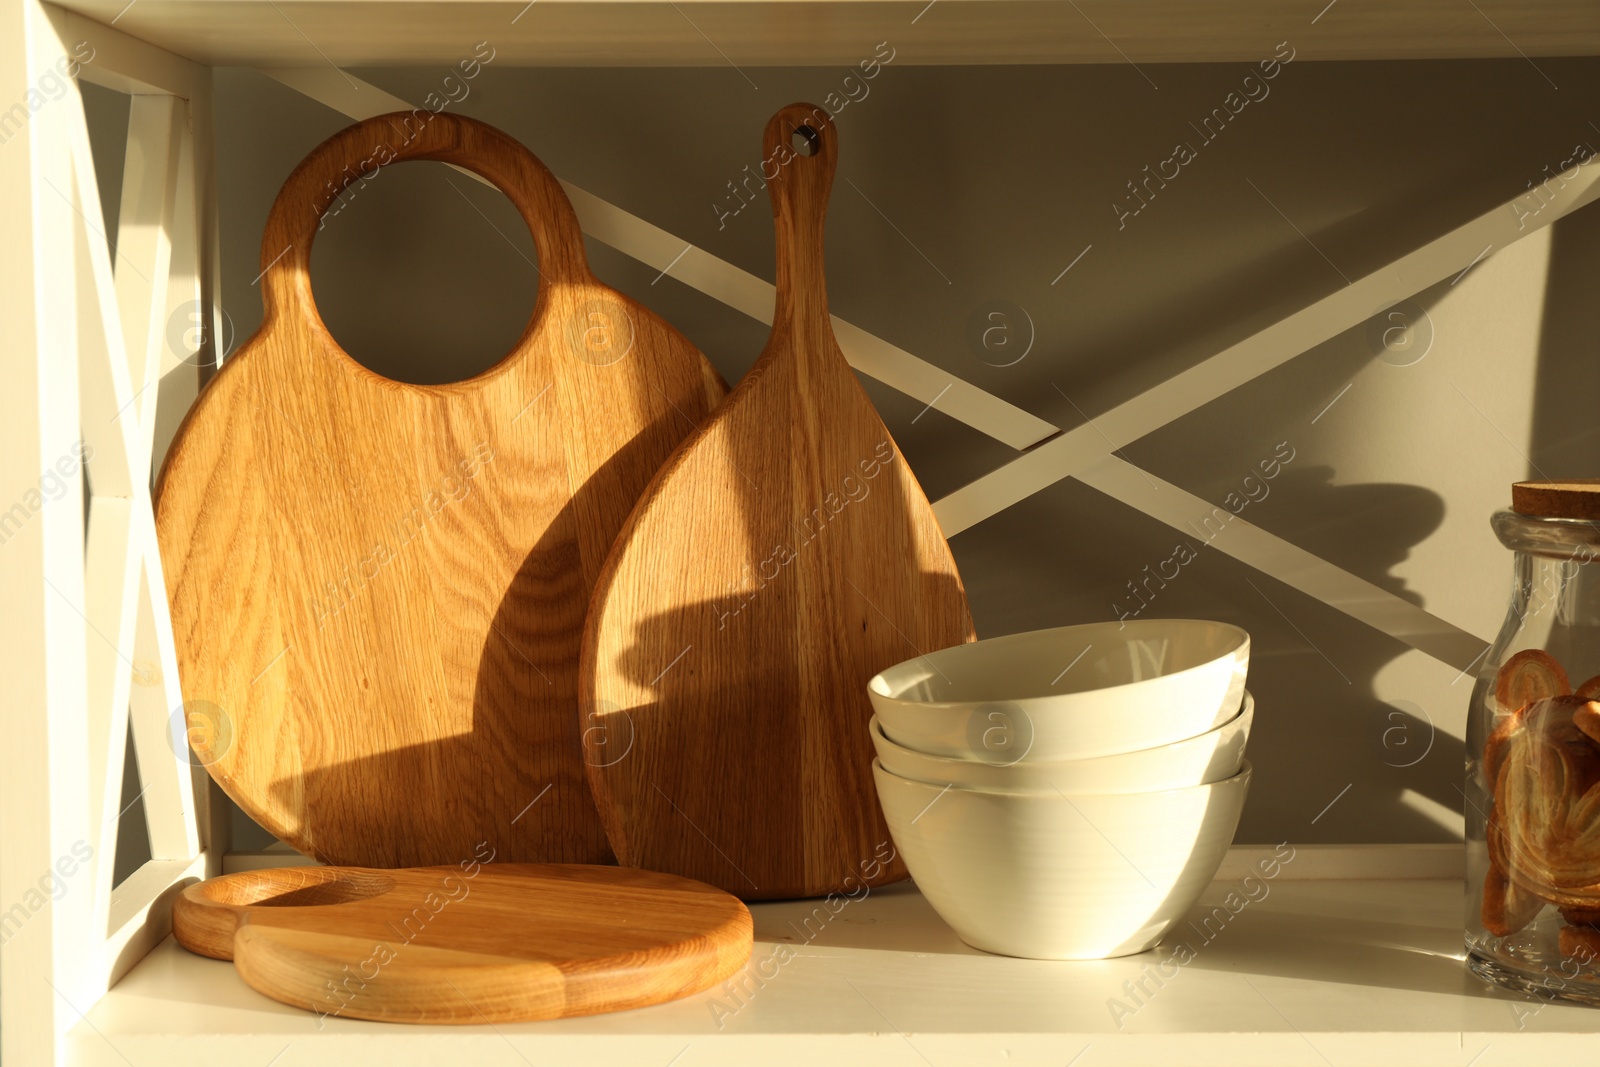 Photo of Wooden cutting boards, bowls and cookies on shelving unit